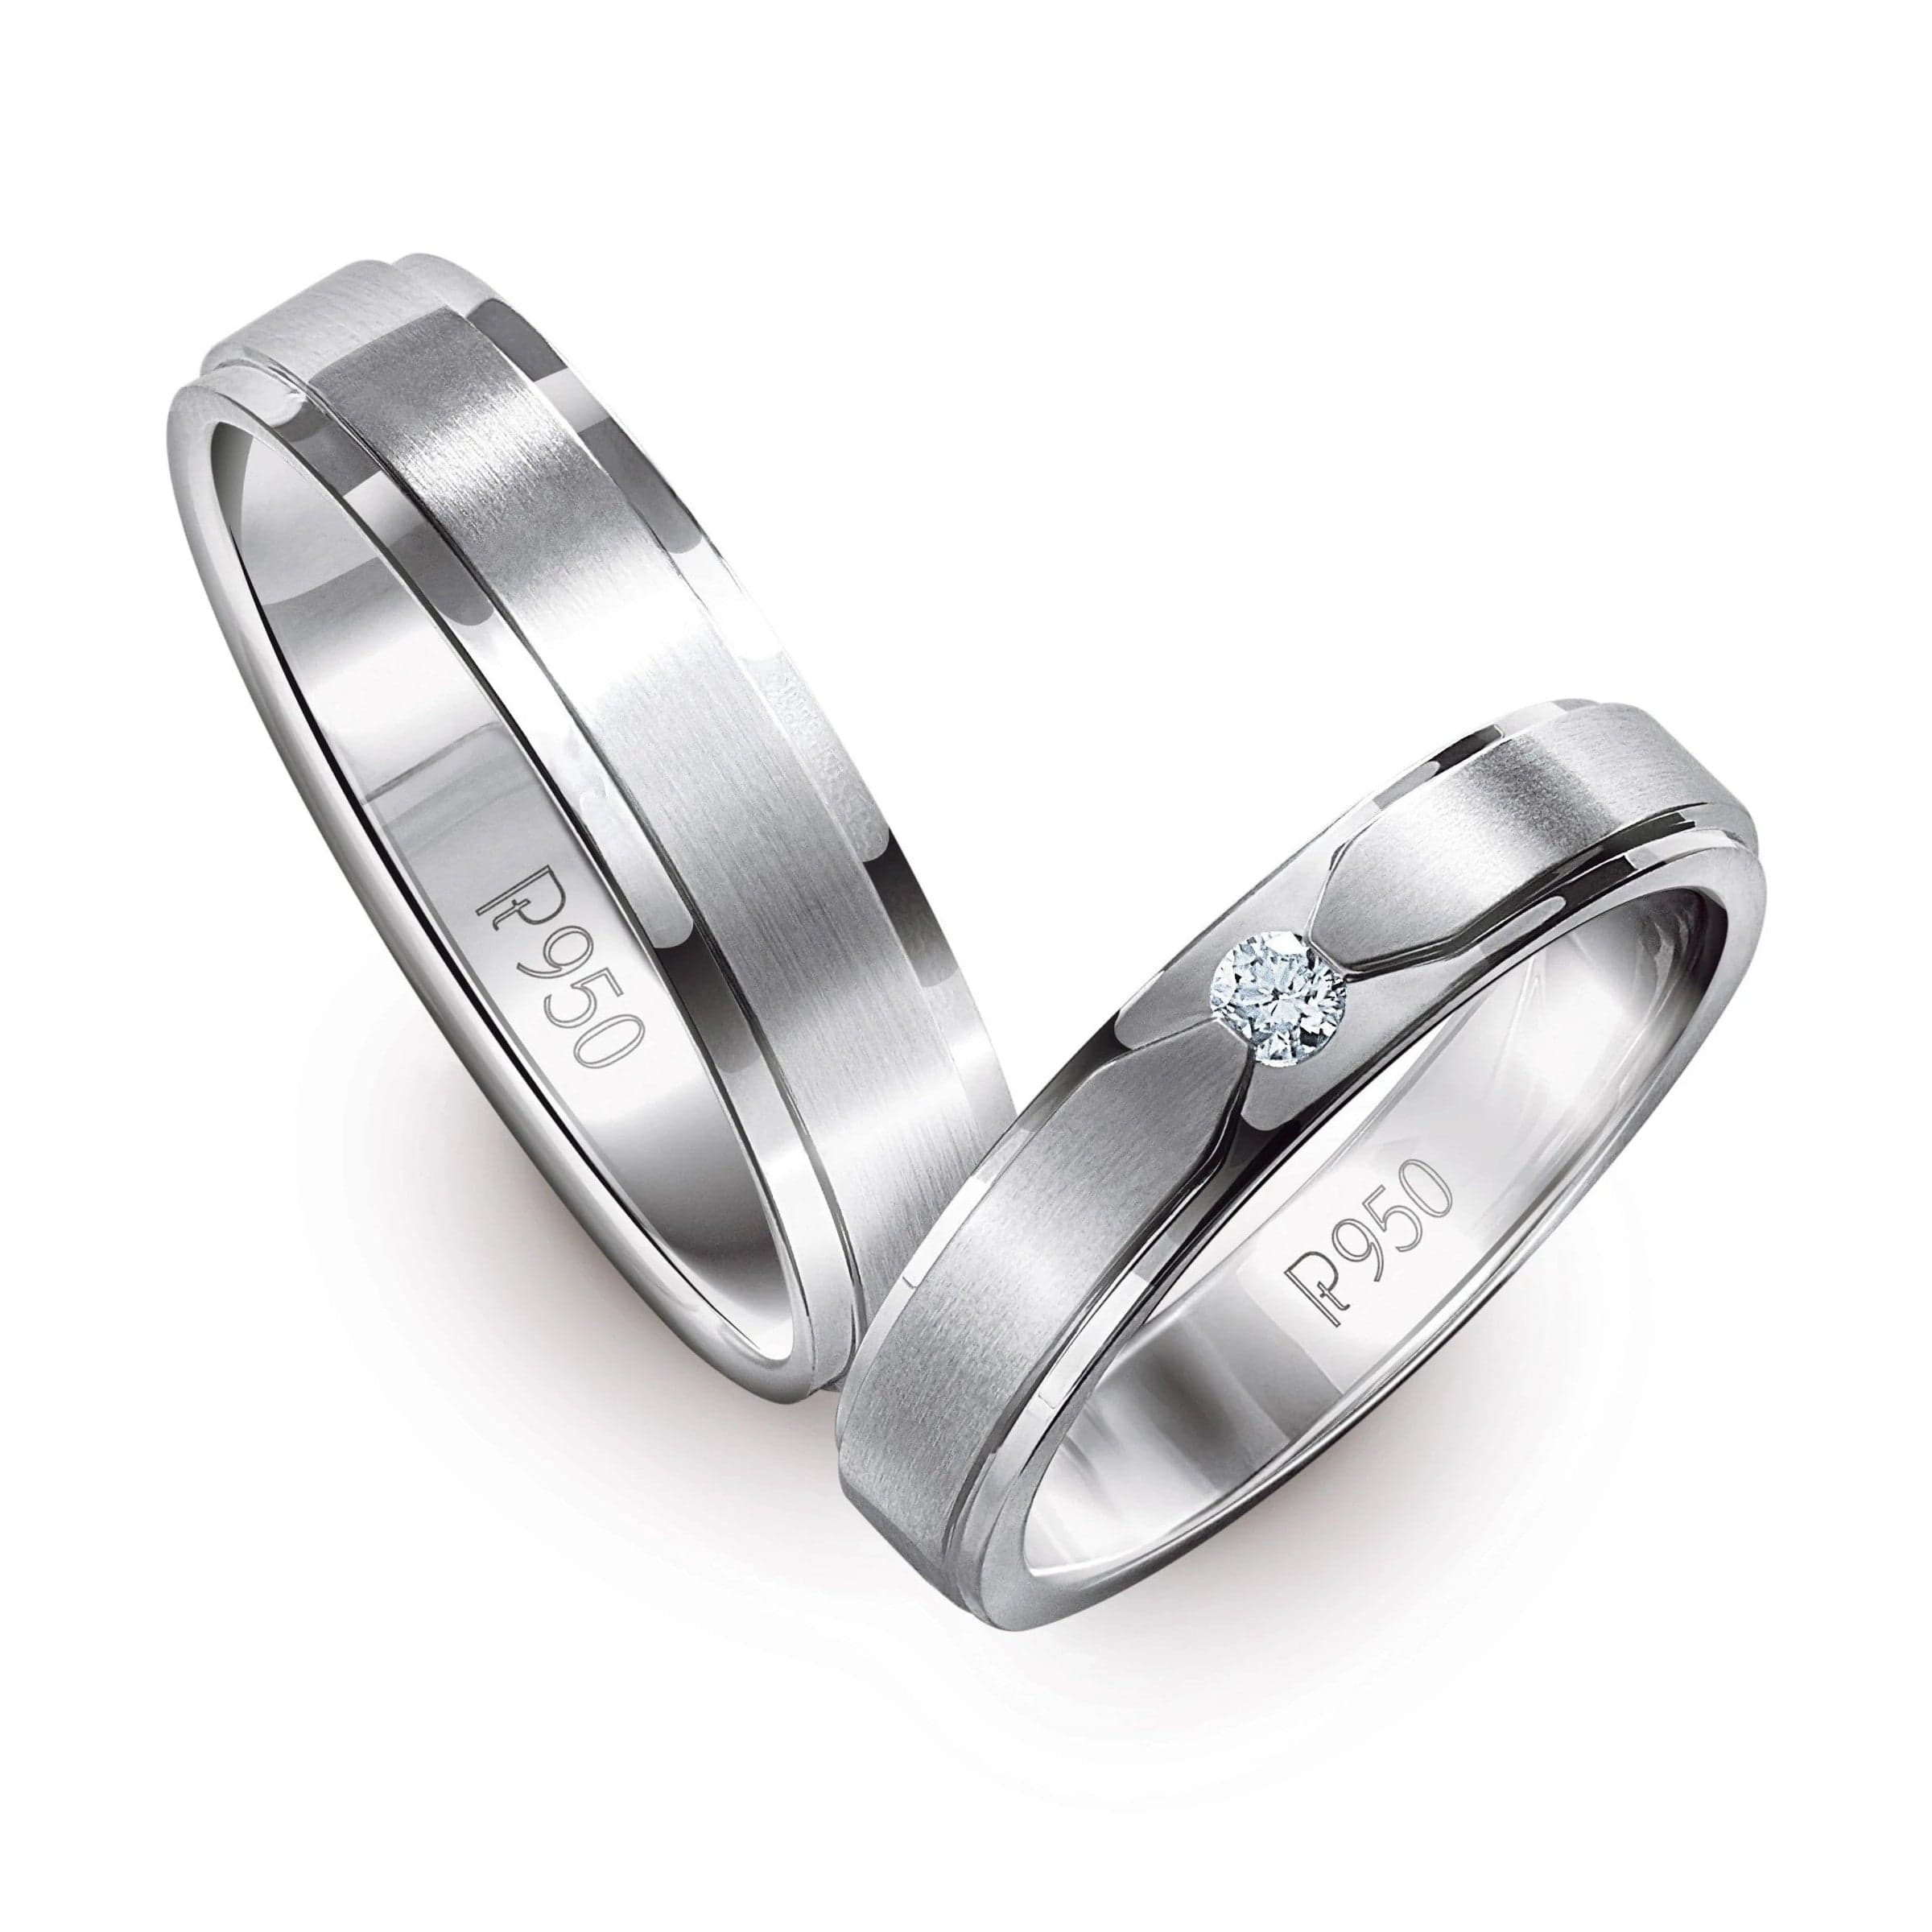 Buy Mine Platinum PT 950 Two Tone Purity Casual Ring for Men Online